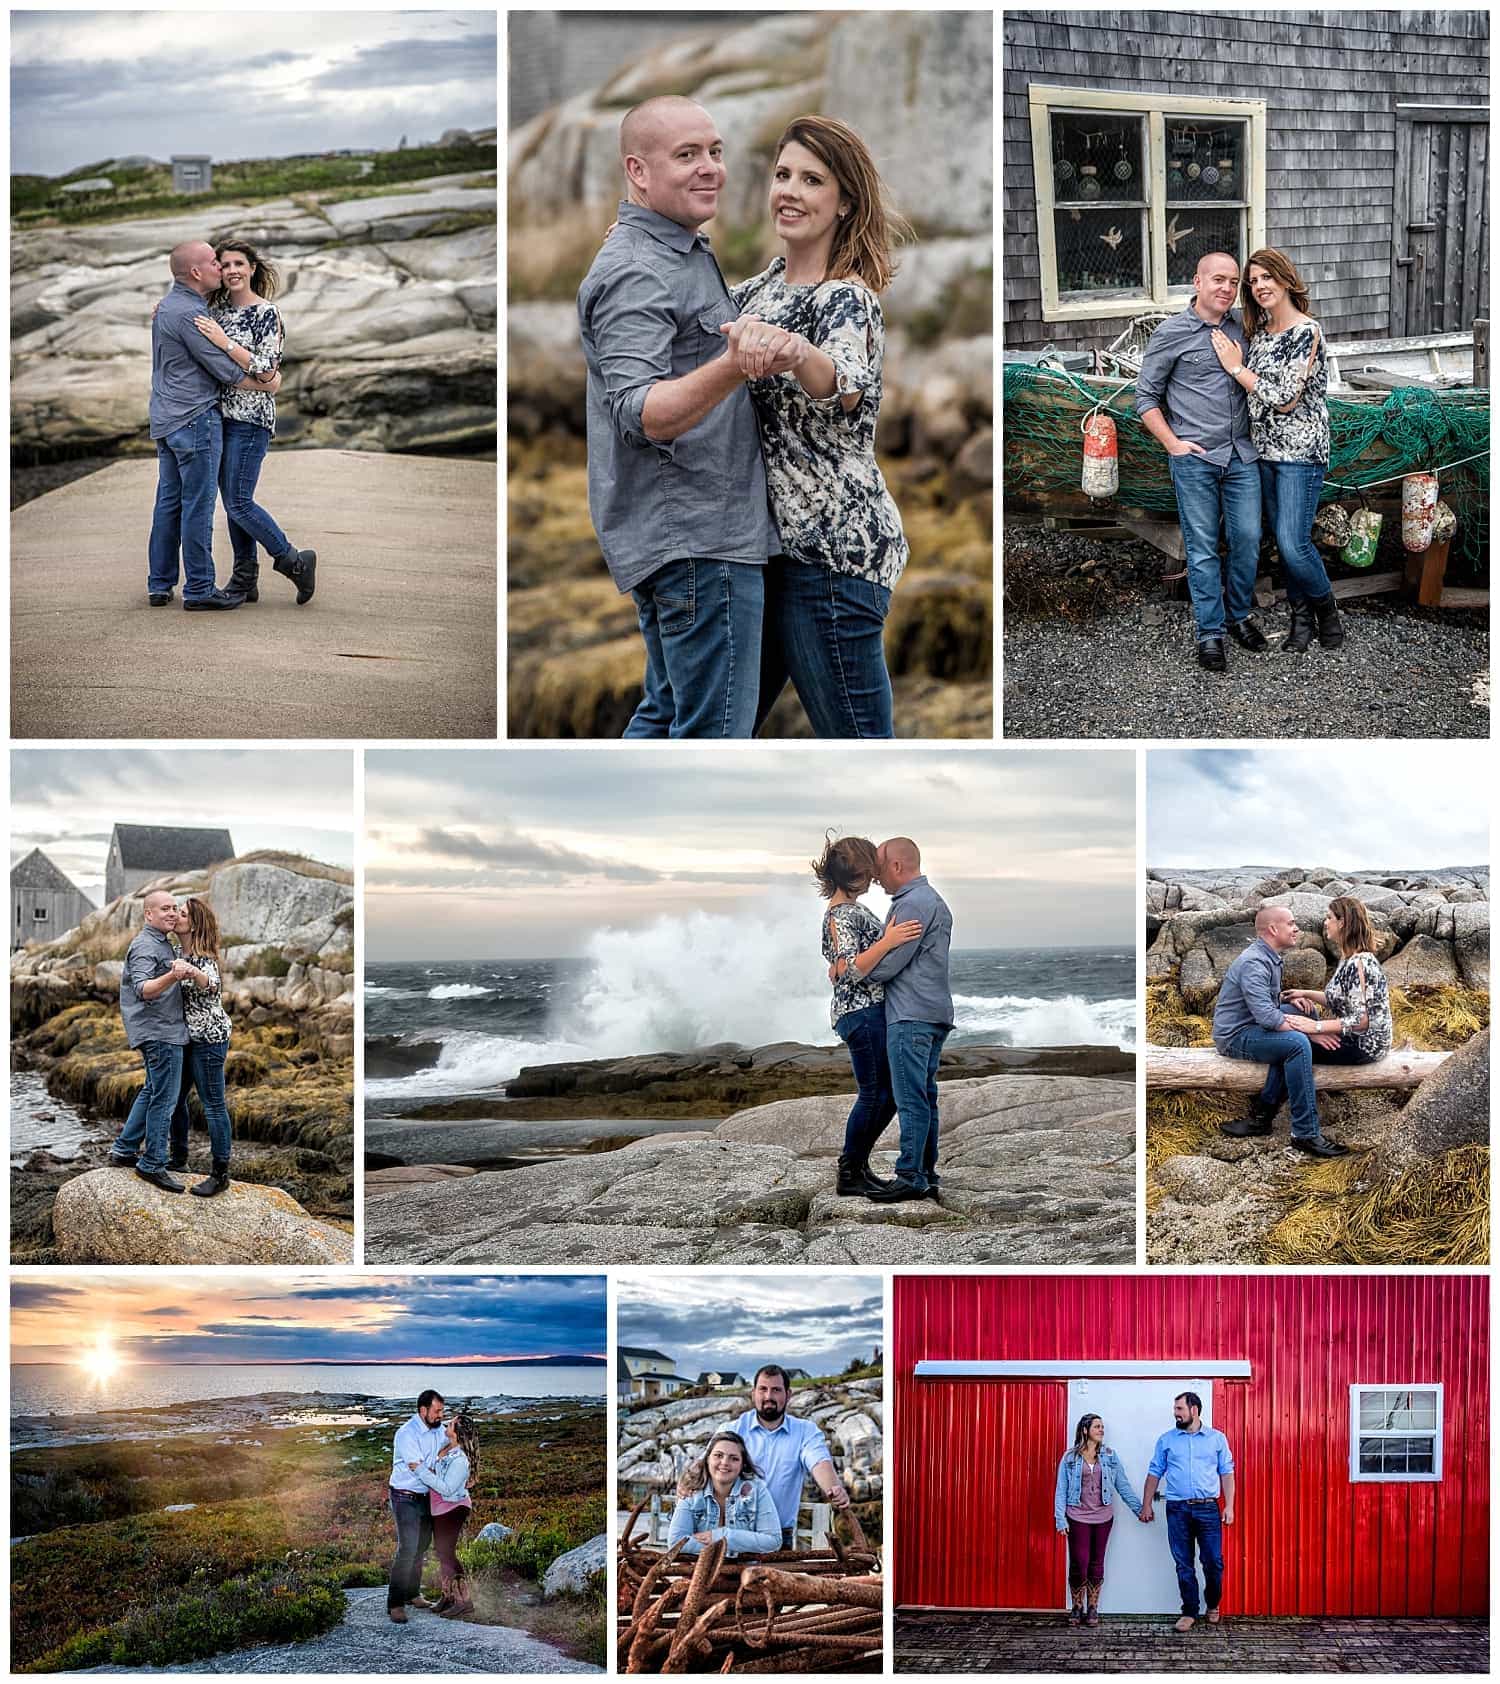 Engagement photos of very cute couples at Peggys Cove in Nova Scotia by a Halifax wedding photographer.